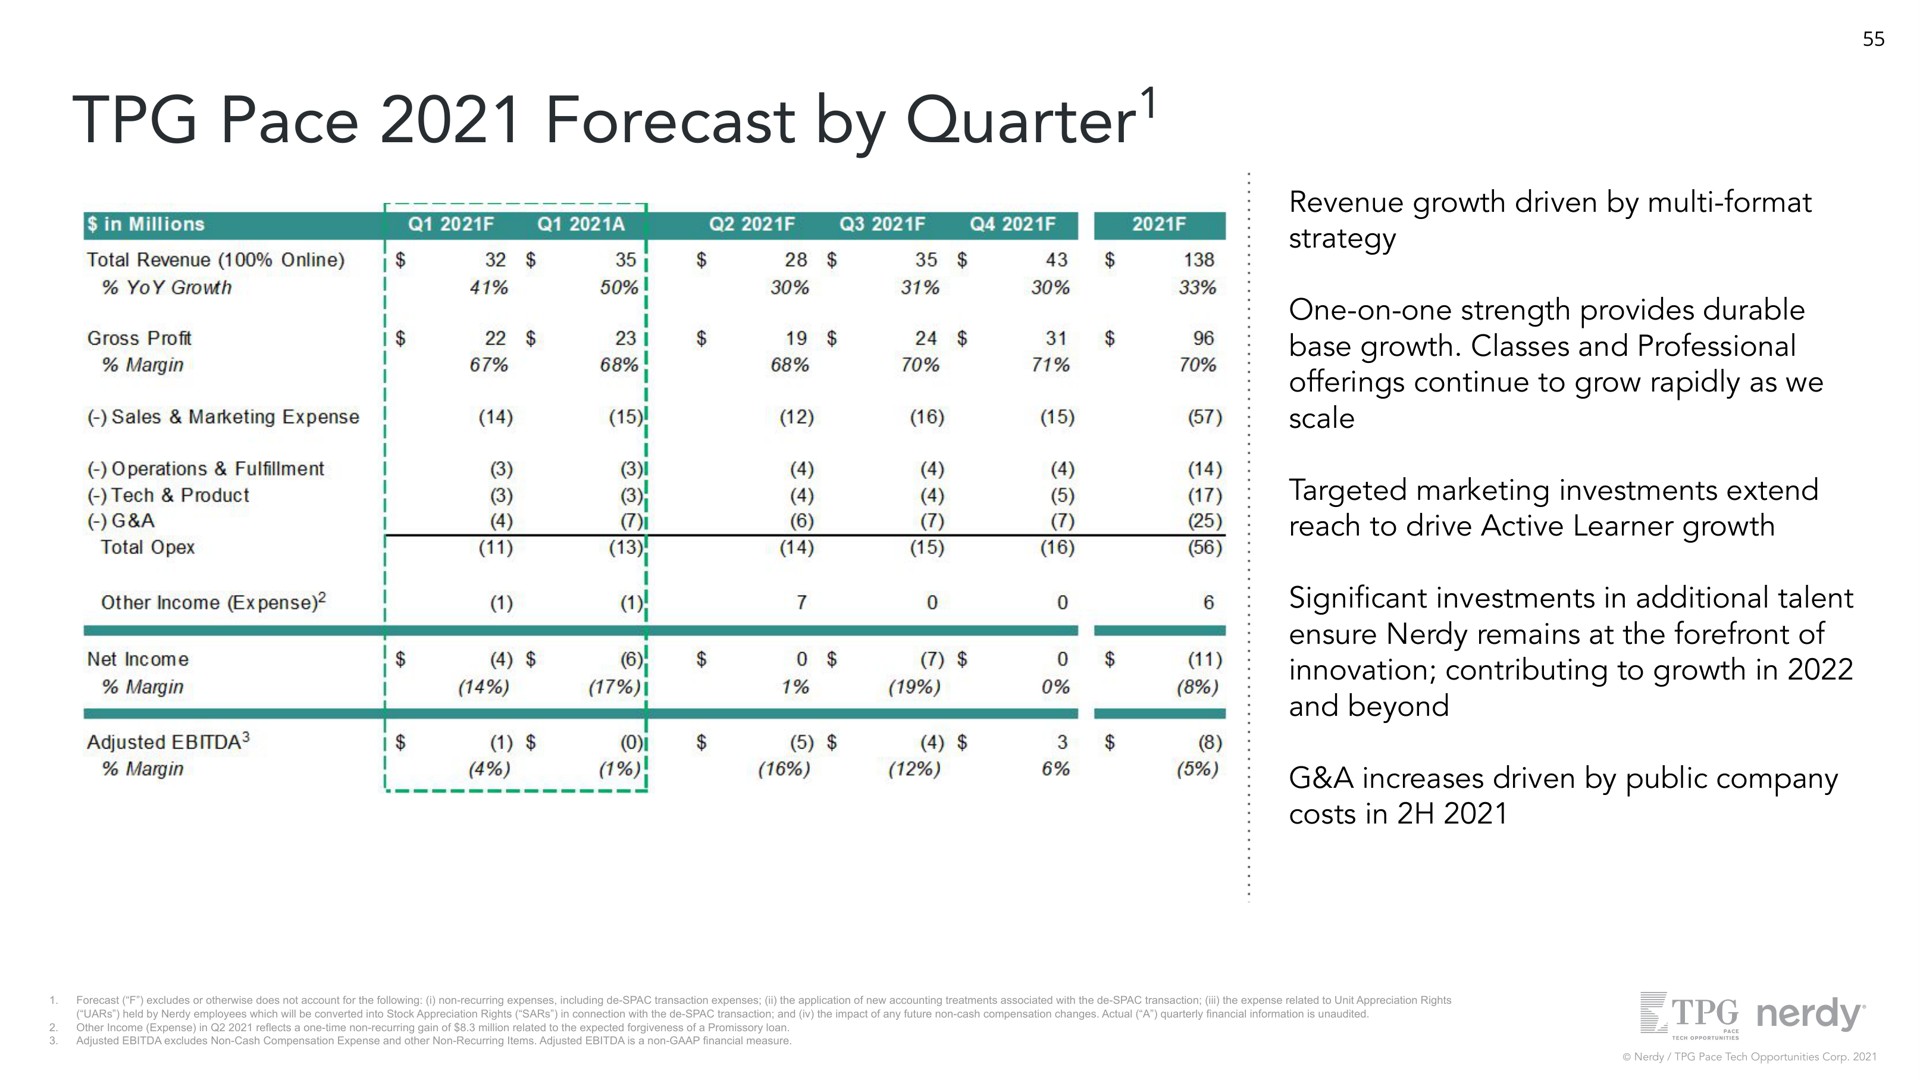 pace forecast by quarter revenue growth driven by format strategy one on one strength provides durable base growth classes and professional offerings continue to grow rapidly as we scale targeted marketing investments extend reach to drive active learner growth cant investments in additional talent ensure remains at the forefront of innovation contributing to growth in and beyond a increases driven by public company costs in quarter | Nerdy